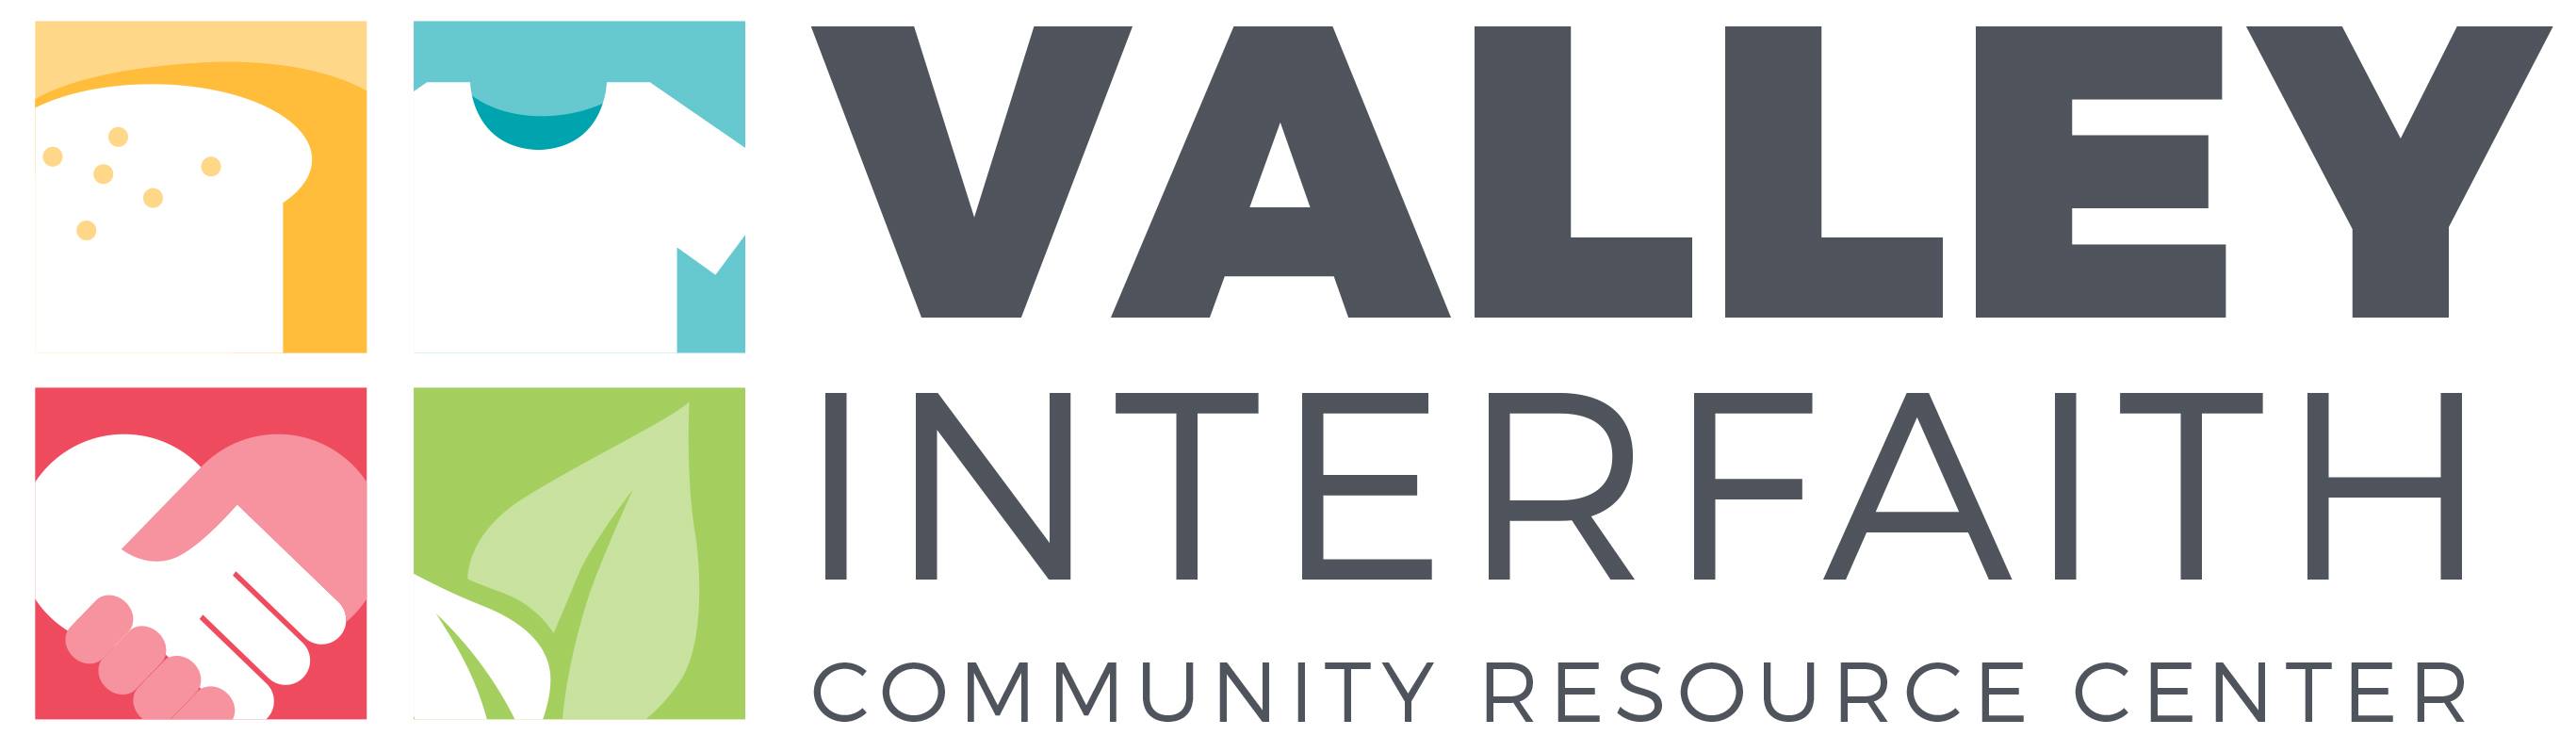 Valley Interfaith Food and Clothing Center